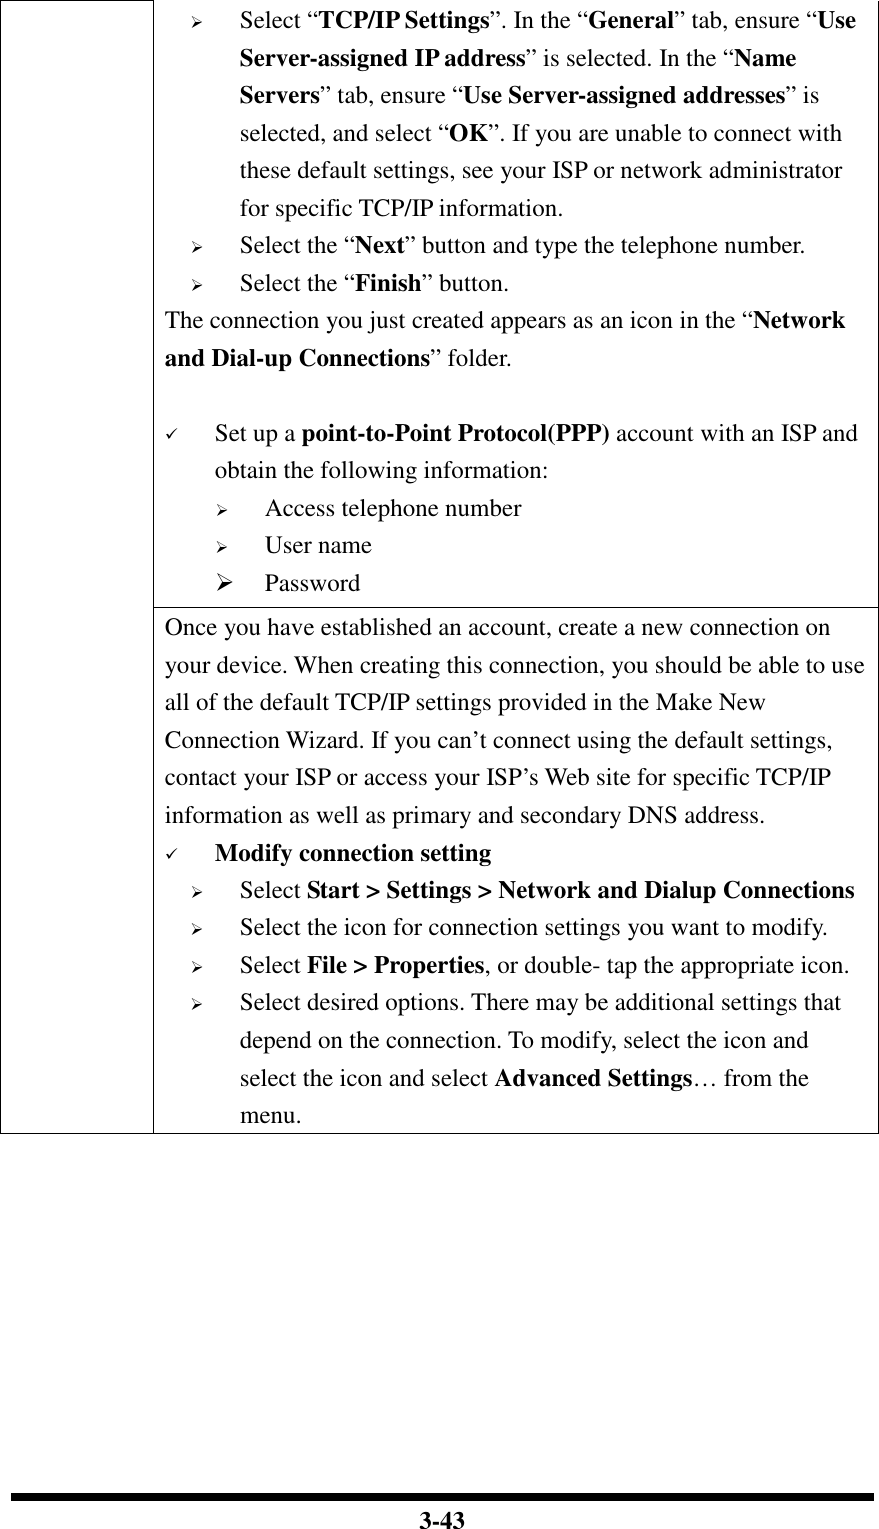  3-43  Select “TCP/IP Settings”. In the “General” tab, ensure “Use Server-assigned IP address” is selected. In the “Name Servers” tab, ensure “Use Server-assigned addresses” is selected, and select “OK”. If you are unable to connect with these default settings, see your ISP or network administrator for specific TCP/IP information.  Select the “Next” button and type the telephone number.  Select the “Finish” button. The connection you just created appears as an icon in the “Network and Dial-up Connections” folder.       Set up a point-to-Point Protocol(PPP) account with an ISP and obtain the following information:  Access telephone number  User name  Password Once you have established an account, create a new connection on your device. When creating this connection, you should be able to use all of the default TCP/IP settings provided in the Make New Connection Wizard. If you can’t connect using the default settings, contact your ISP or access your ISP’s Web site for specific TCP/IP information as well as primary and secondary DNS address.  Modify connection setting  Select Start &gt; Settings &gt; Network and Dialup Connections  Select the icon for connection settings you want to modify.  Select File &gt; Properties, or double- tap the appropriate icon.  Select desired options. There may be additional settings that depend on the connection. To modify, select the icon and select the icon and select Advanced Settings… from the menu.  